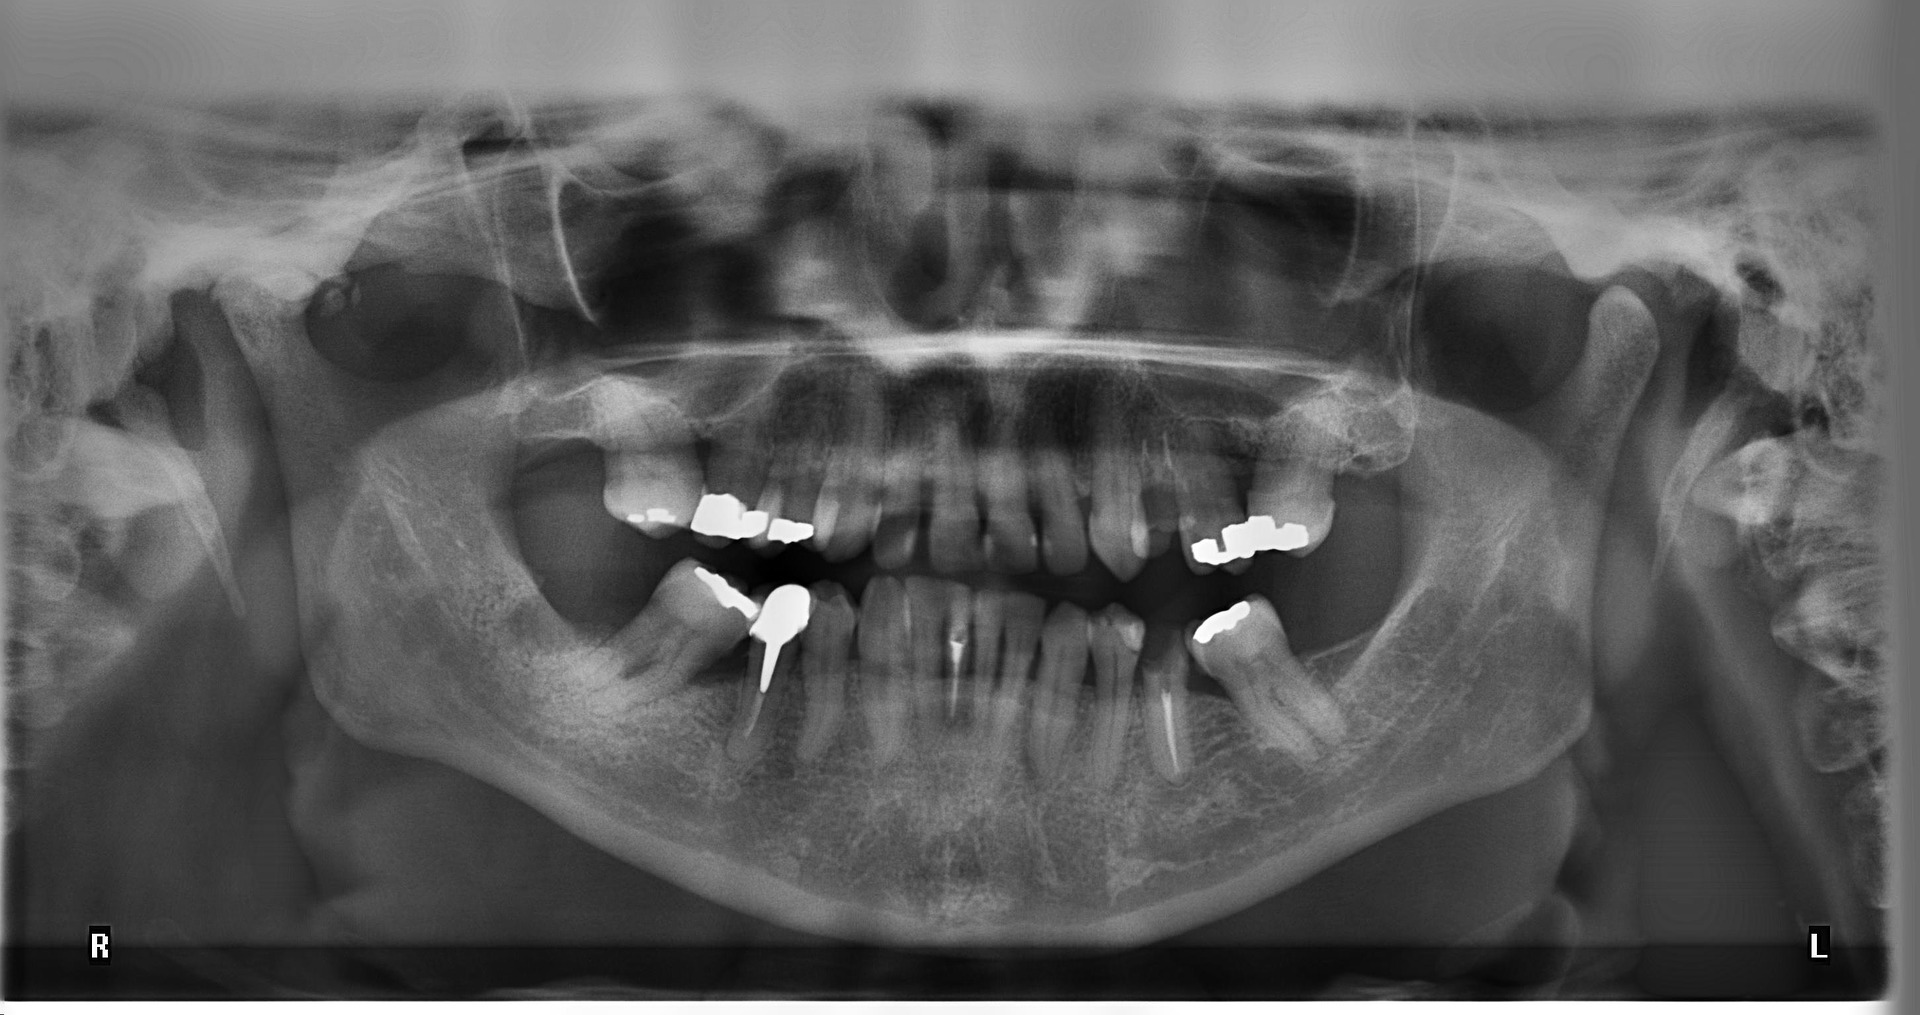 How Many Dental X-Rays are Performed in the United States?